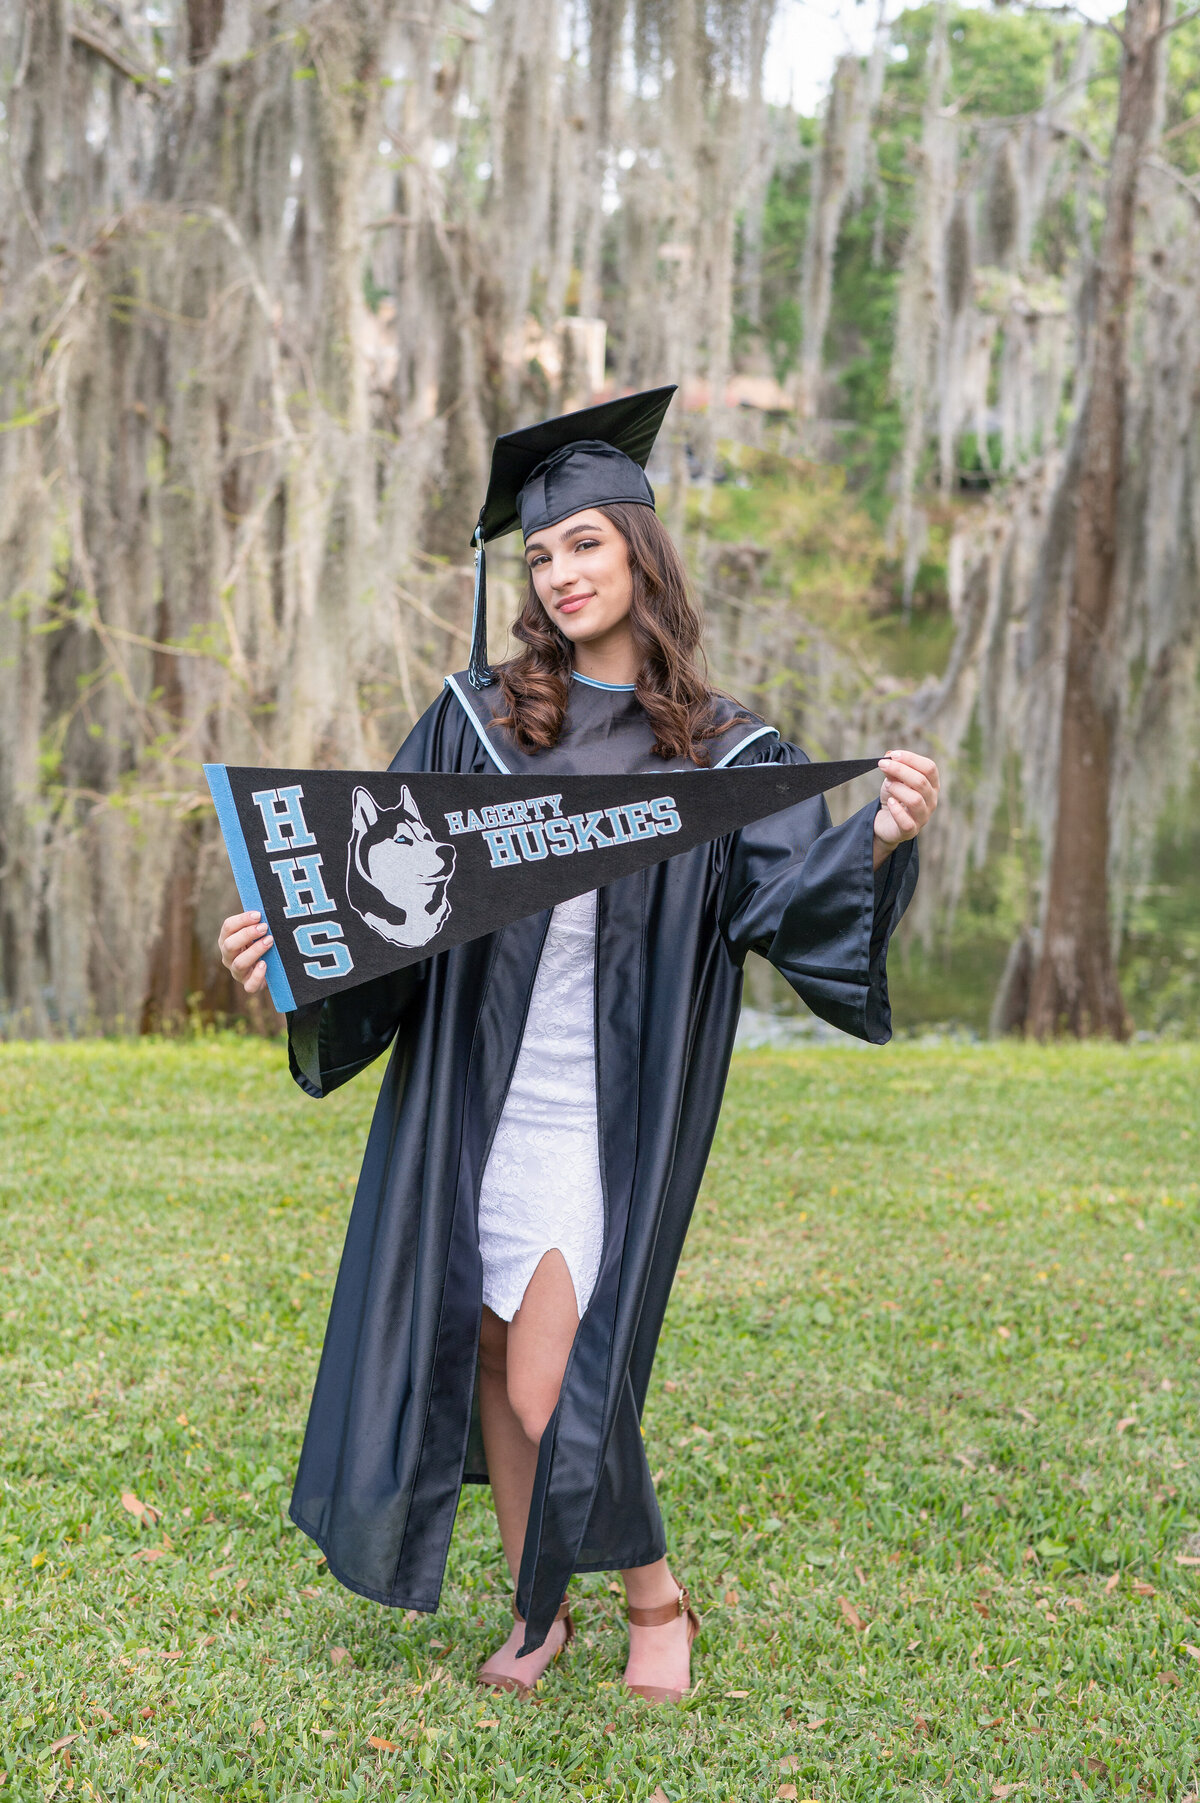 High school senior girl in cap and gown holds a Hagerty Huskies pennant.